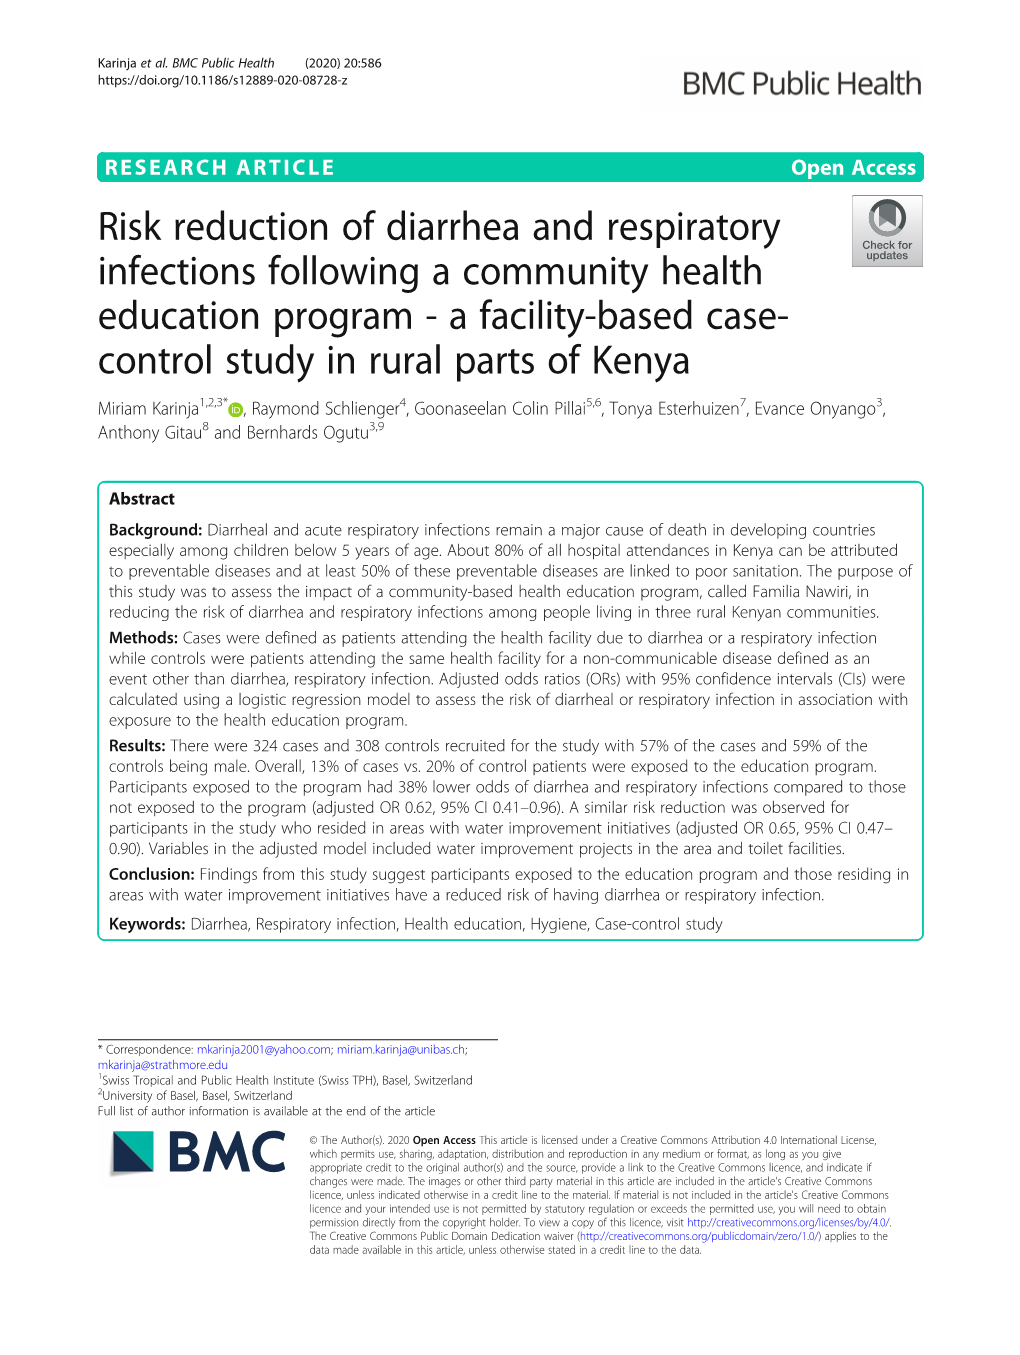 Risk Reduction of Diarrhea and Respiratory